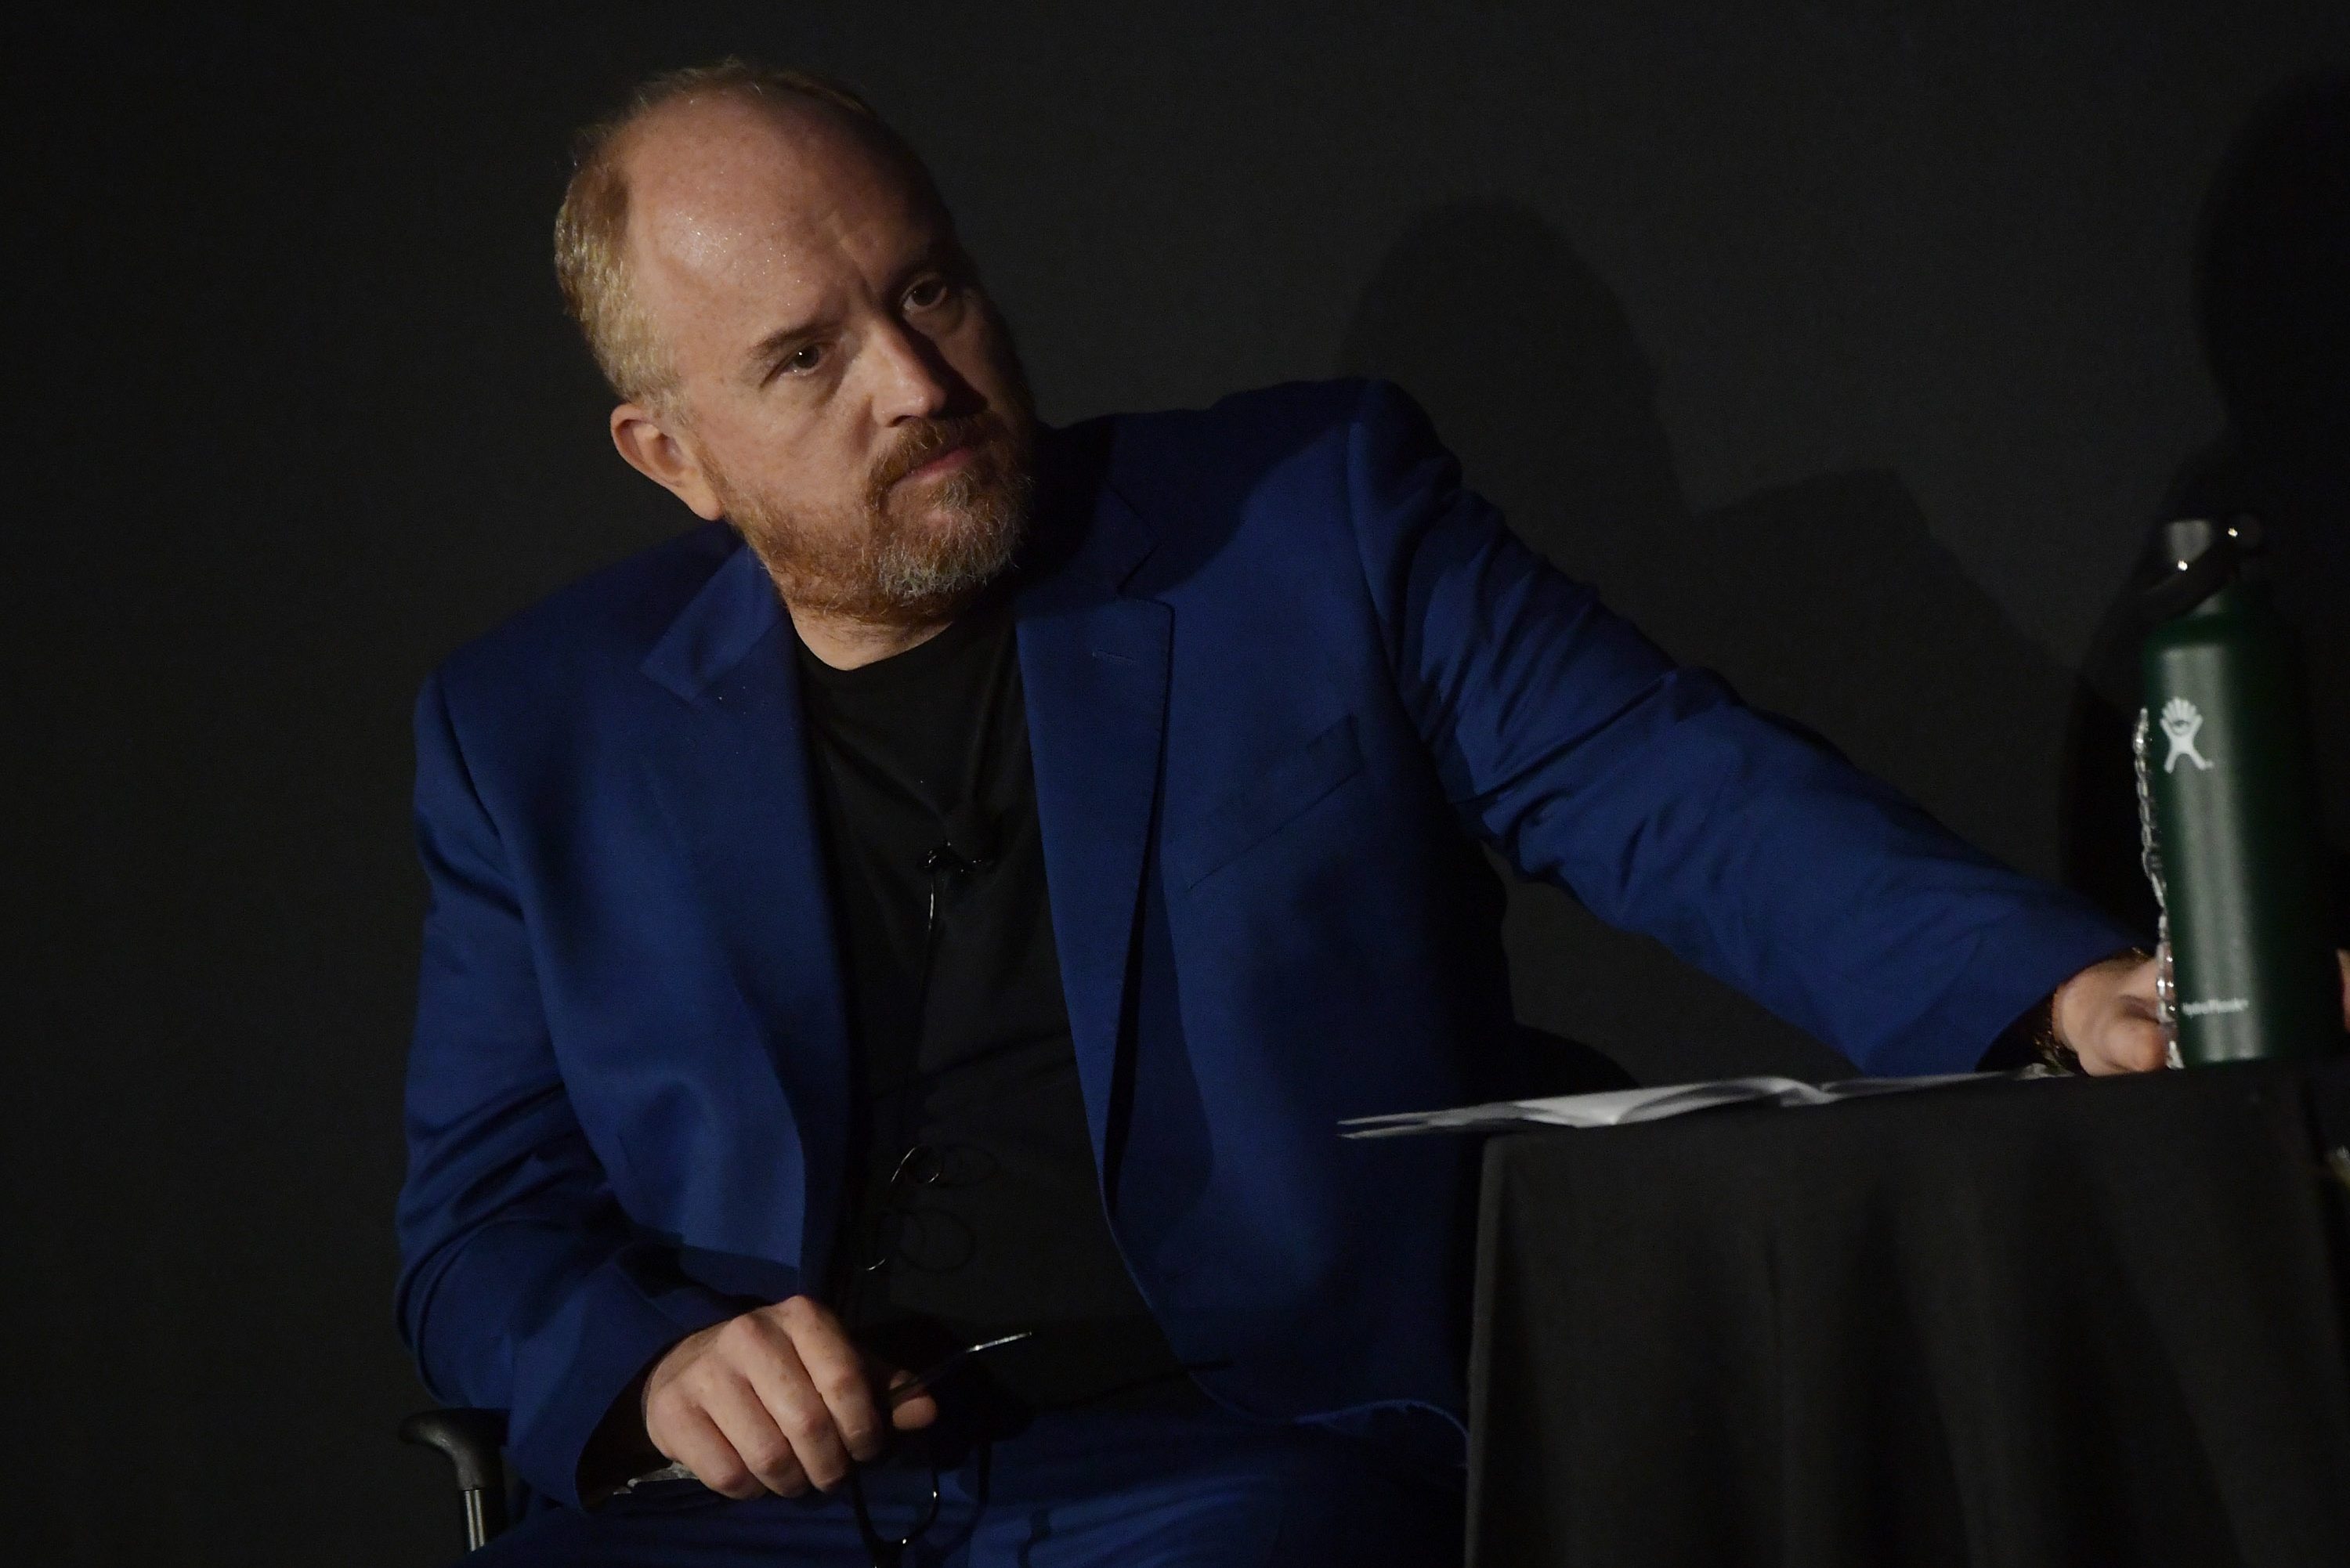 Louis C.K. kicked off his new comedy tour with a sarcastic, tone-deaf apology. Pictured here, Louis C.K. attends Tribeca TV Festival's sneak peek of Better Things at Cinepolis Chelsea on September 22, 2017 in New York City.